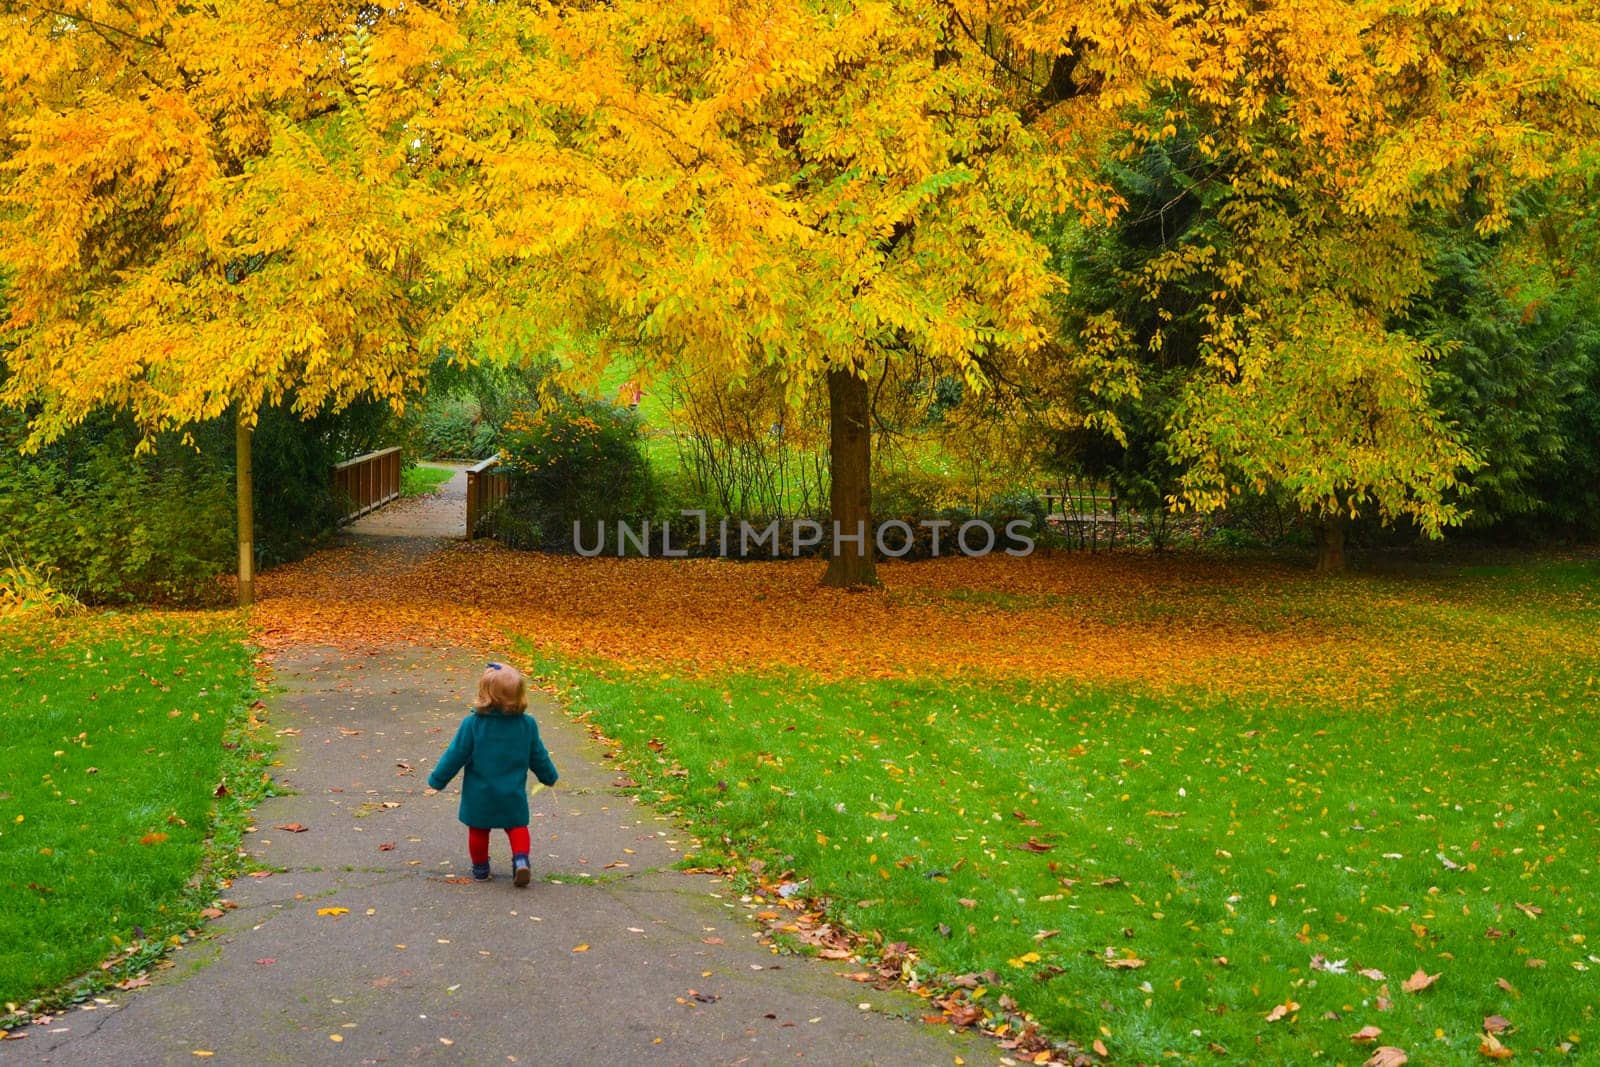 Little girl runs away in a park with yellow trees and fallen leaves by Godi